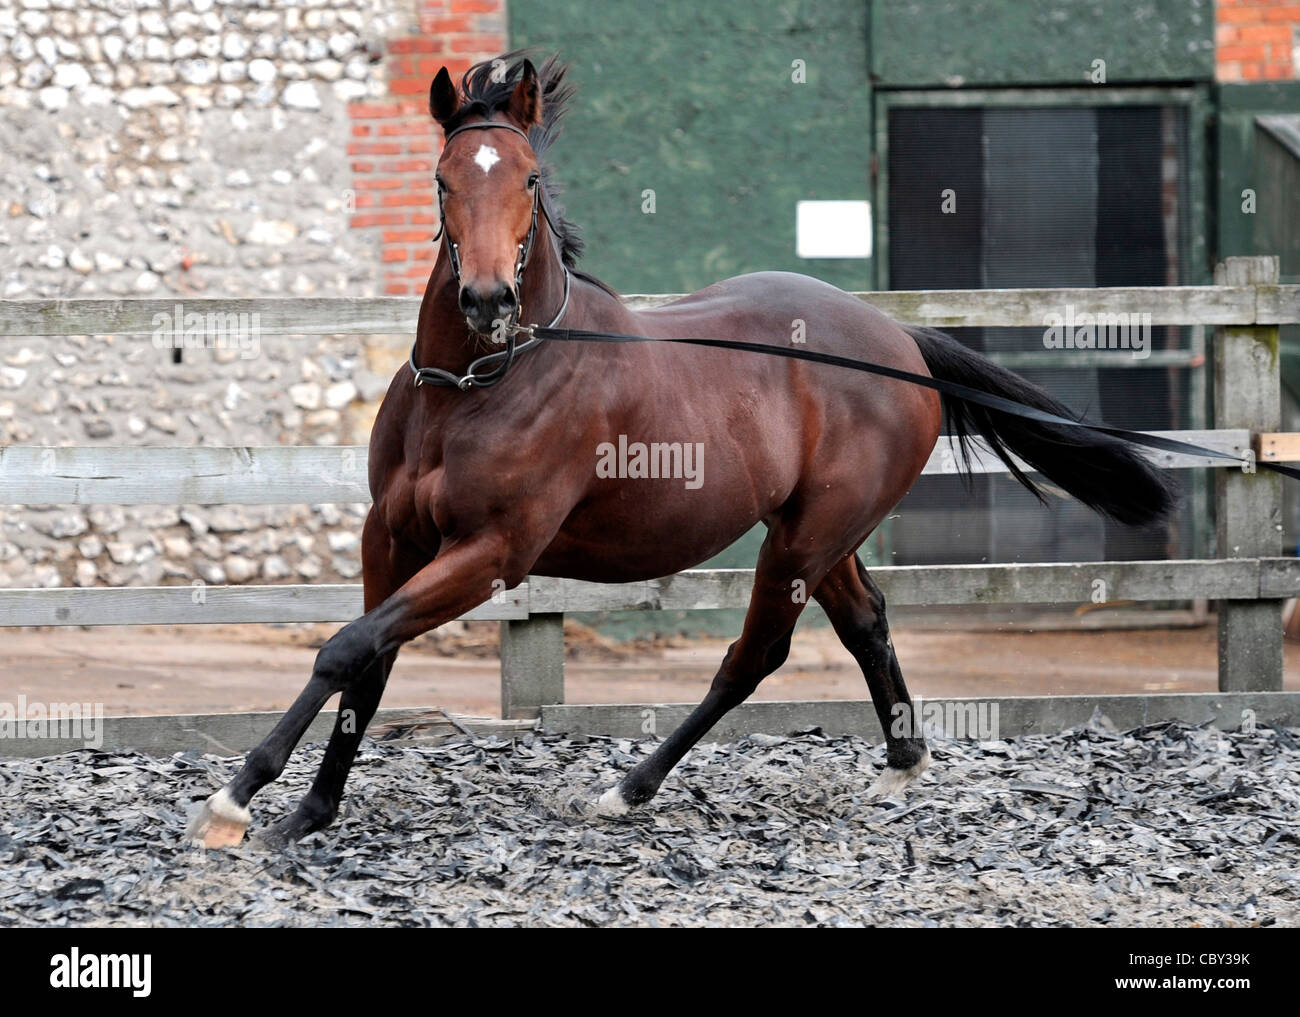 Young race horse being trained. Stock Photo